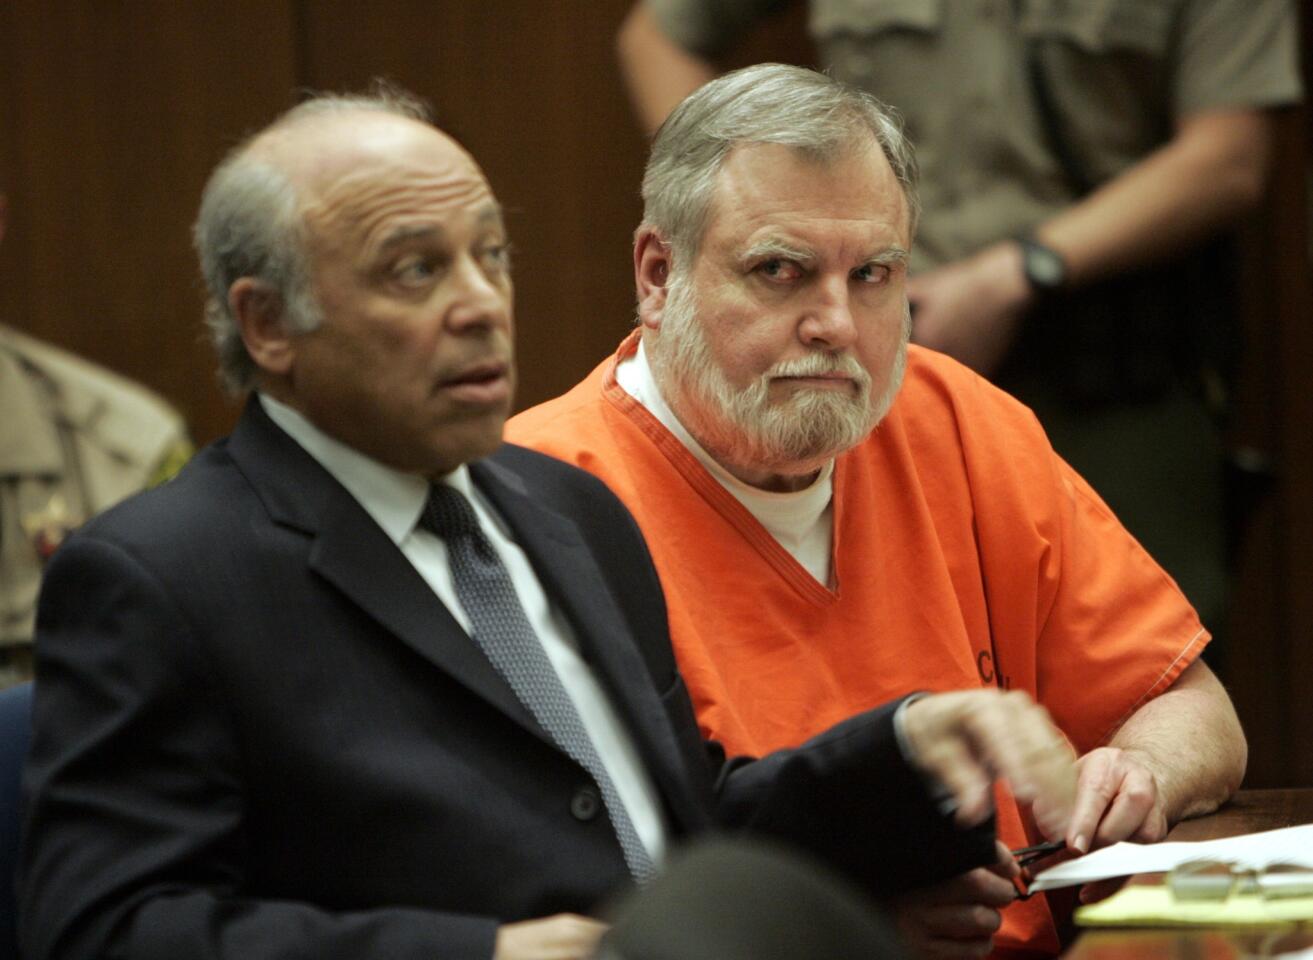 Former Catholic priest Michael Baker is shown at his sentencing in December 2007. At the time, the Los Angeles Archdiocese, where much of his abuse occurred, was issuing checks to hundreds of alleged abuse victims.